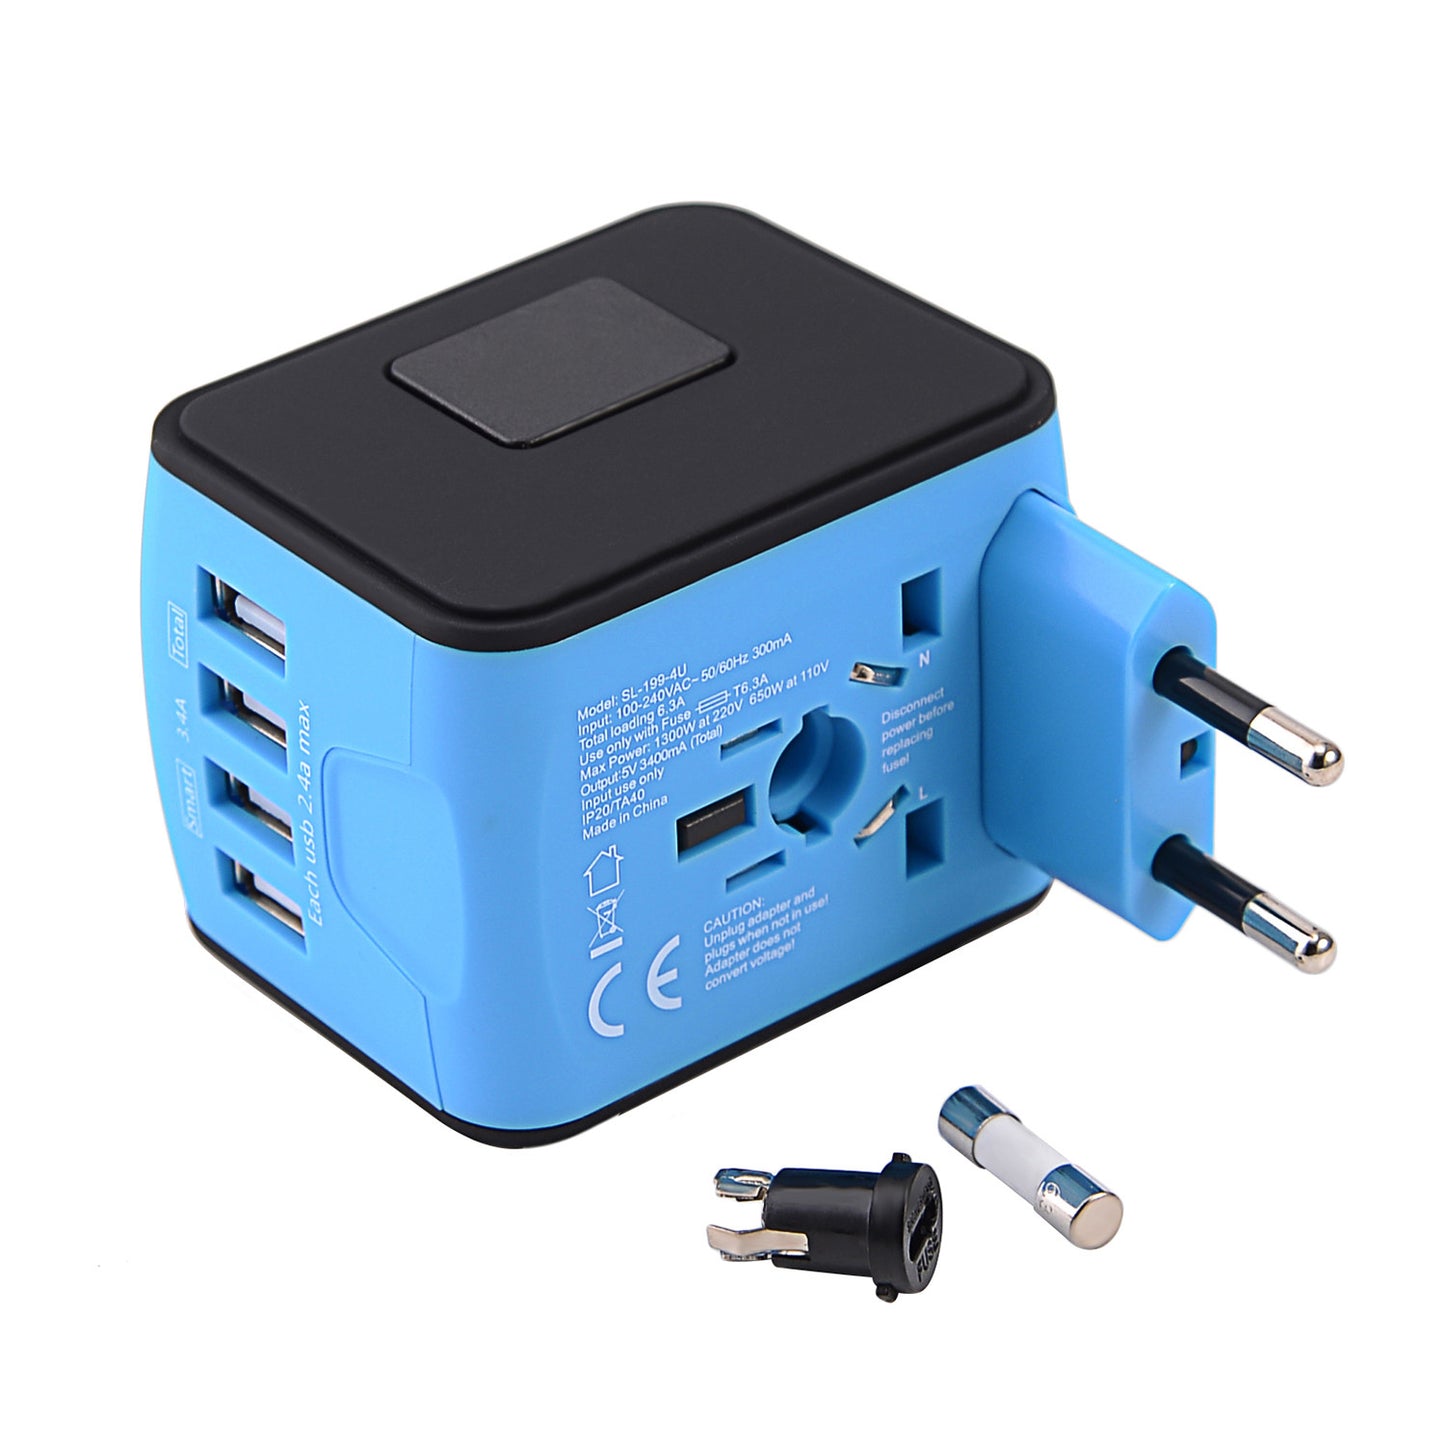 JMFONE International Travel Adapter Universal Power Adapter Worldwide All in One 4 USB Perfect for European US, EU, UK, AU 160 Countries (Blue)